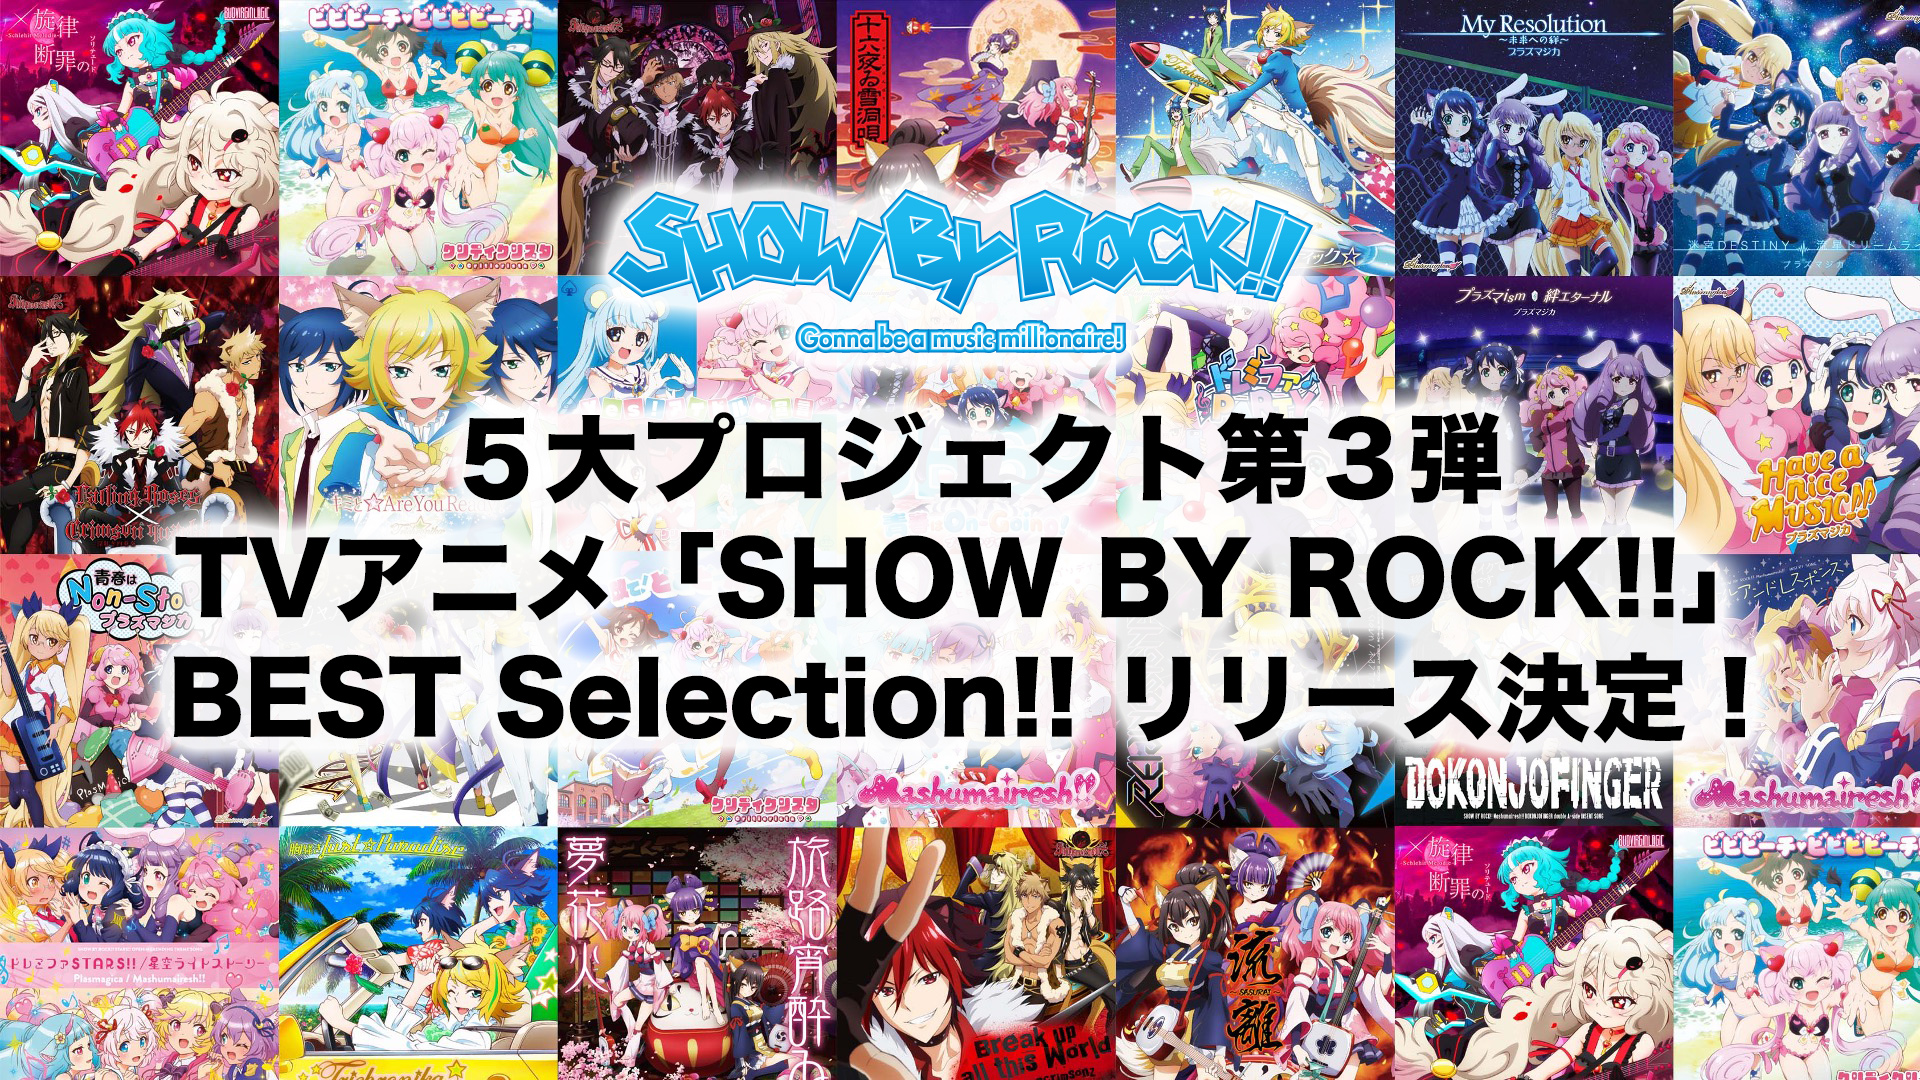 Qoo News] “SHOW BY ROCK!! Mashumairesh!!” Anime New PV Introduces